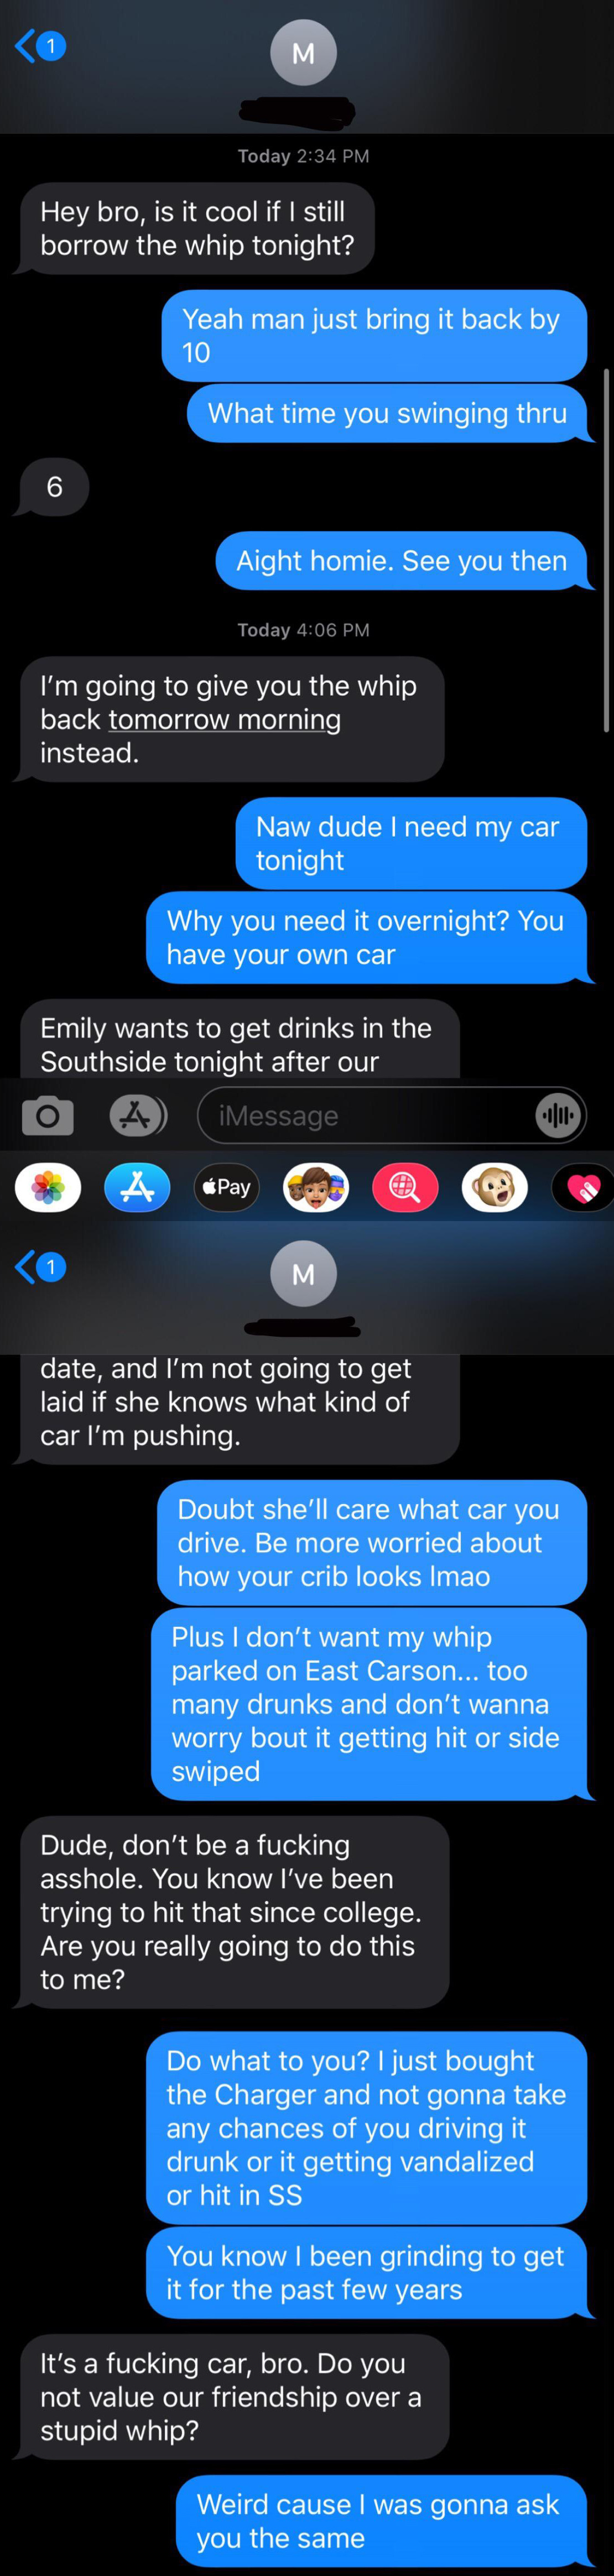 Person One asks Person Two to borrow their car for a date, but gets upset when Person Two asks them to have it back that same night, questioning their friendship